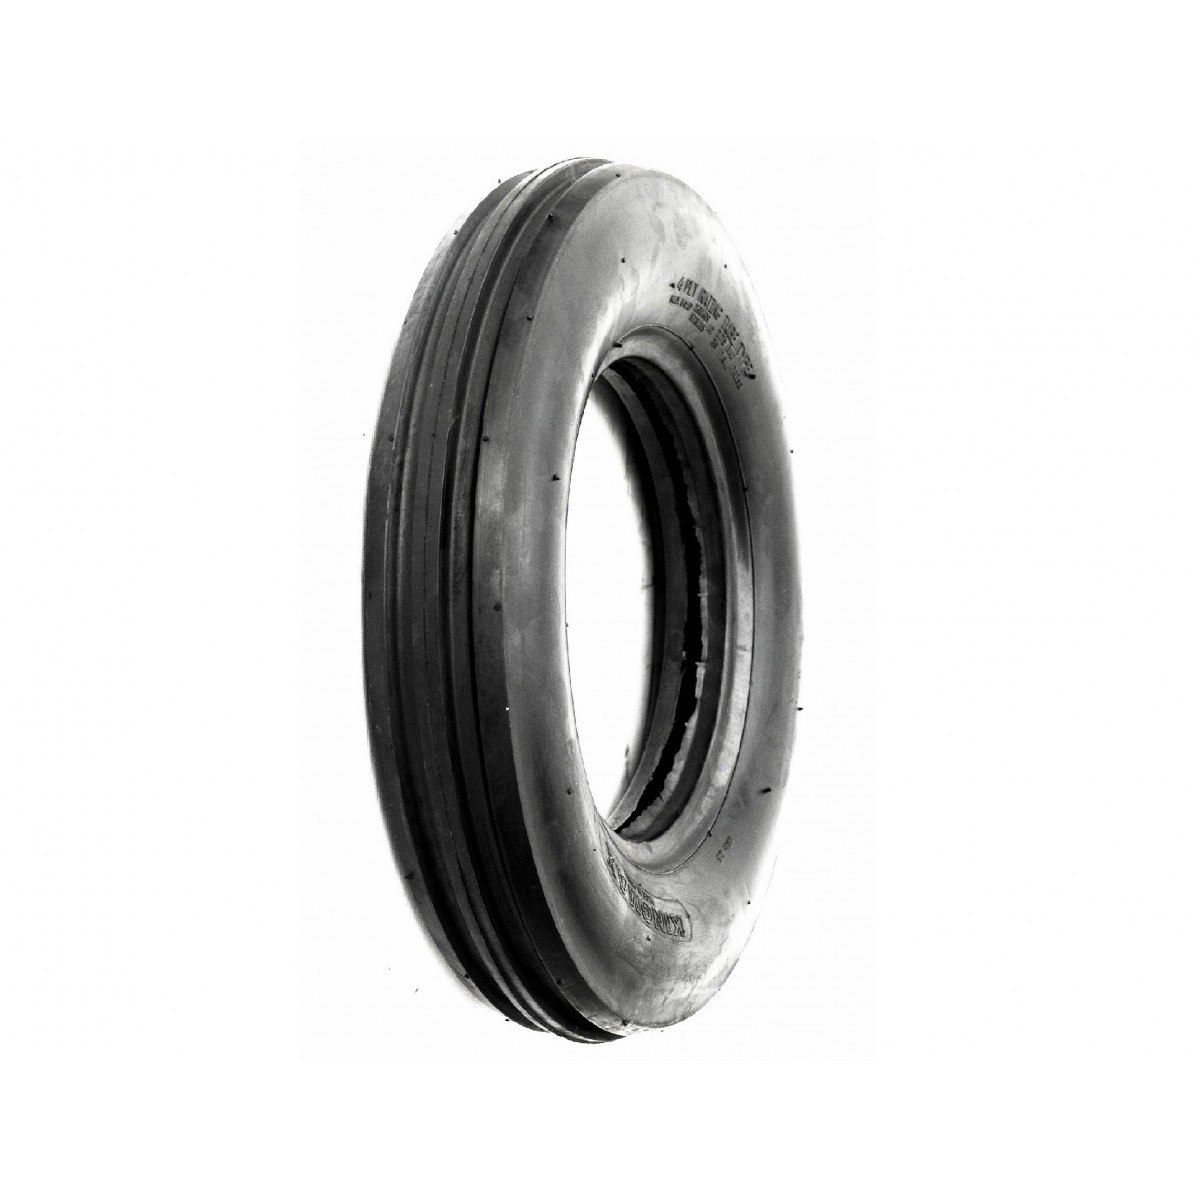 Agricultural tire 4.00-15 FP6